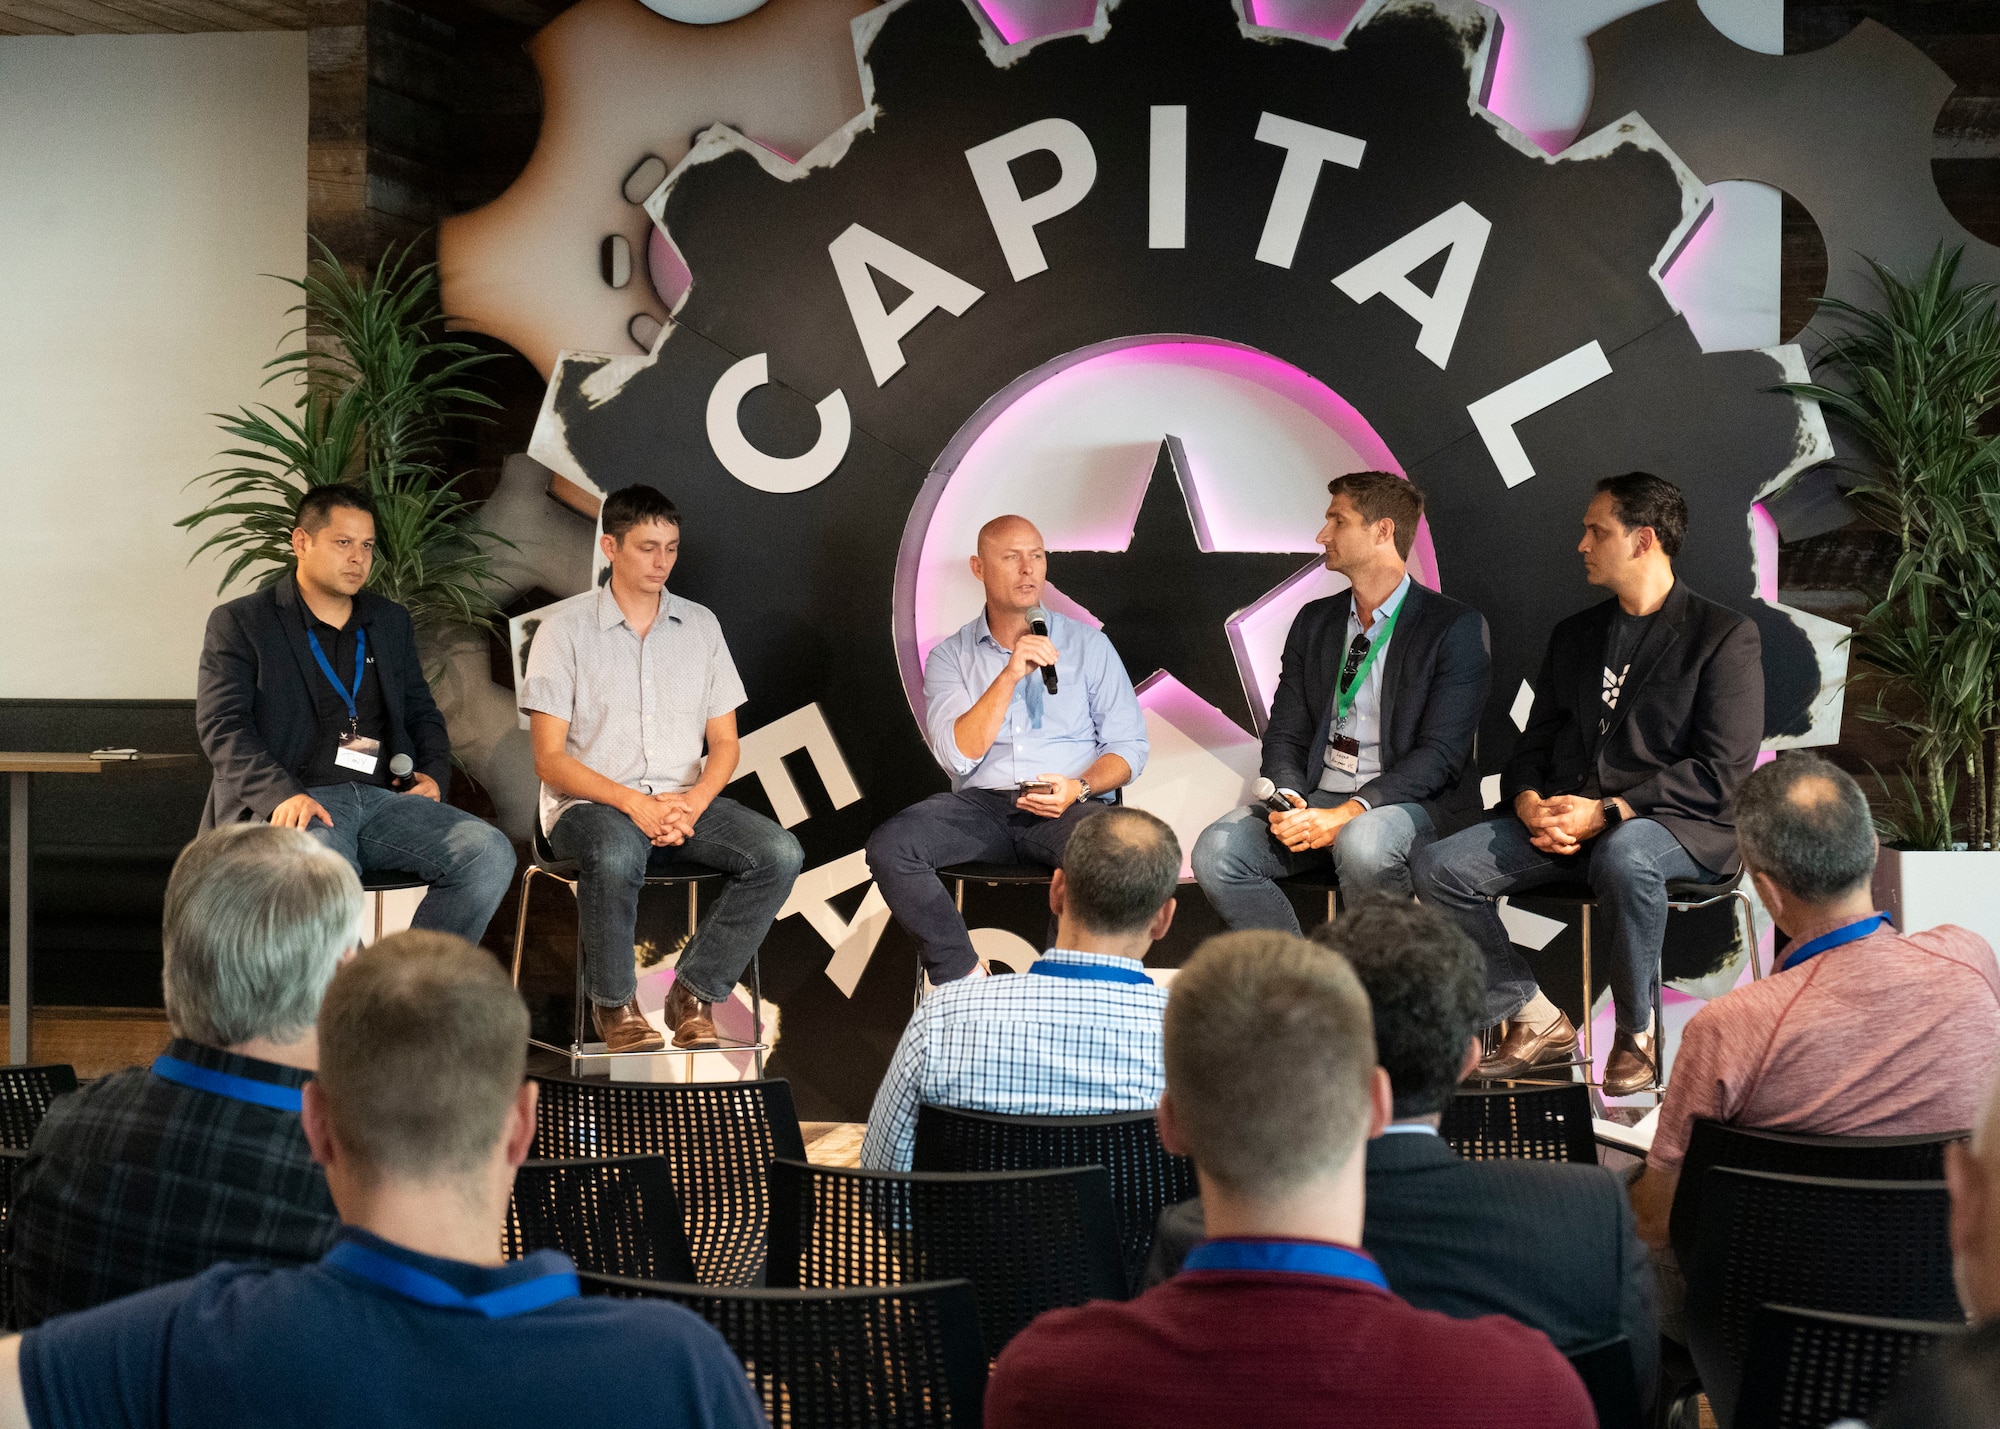 Kevin Landtroop, Capital Factory venture partner, speaks on a panel about the symbiosis between startups, government, and venture capital during the first-ever Spark Collider at the AFWERX Austin Hub Aug 14, 2019. The event connected approximately 100 Phase I Small Business Innovation Research companies and Airmen from about 50 bases to potentially solve Air Force problem areas. (U.S. Air Force photo by Staff Sgt. Jordyn Fetter)